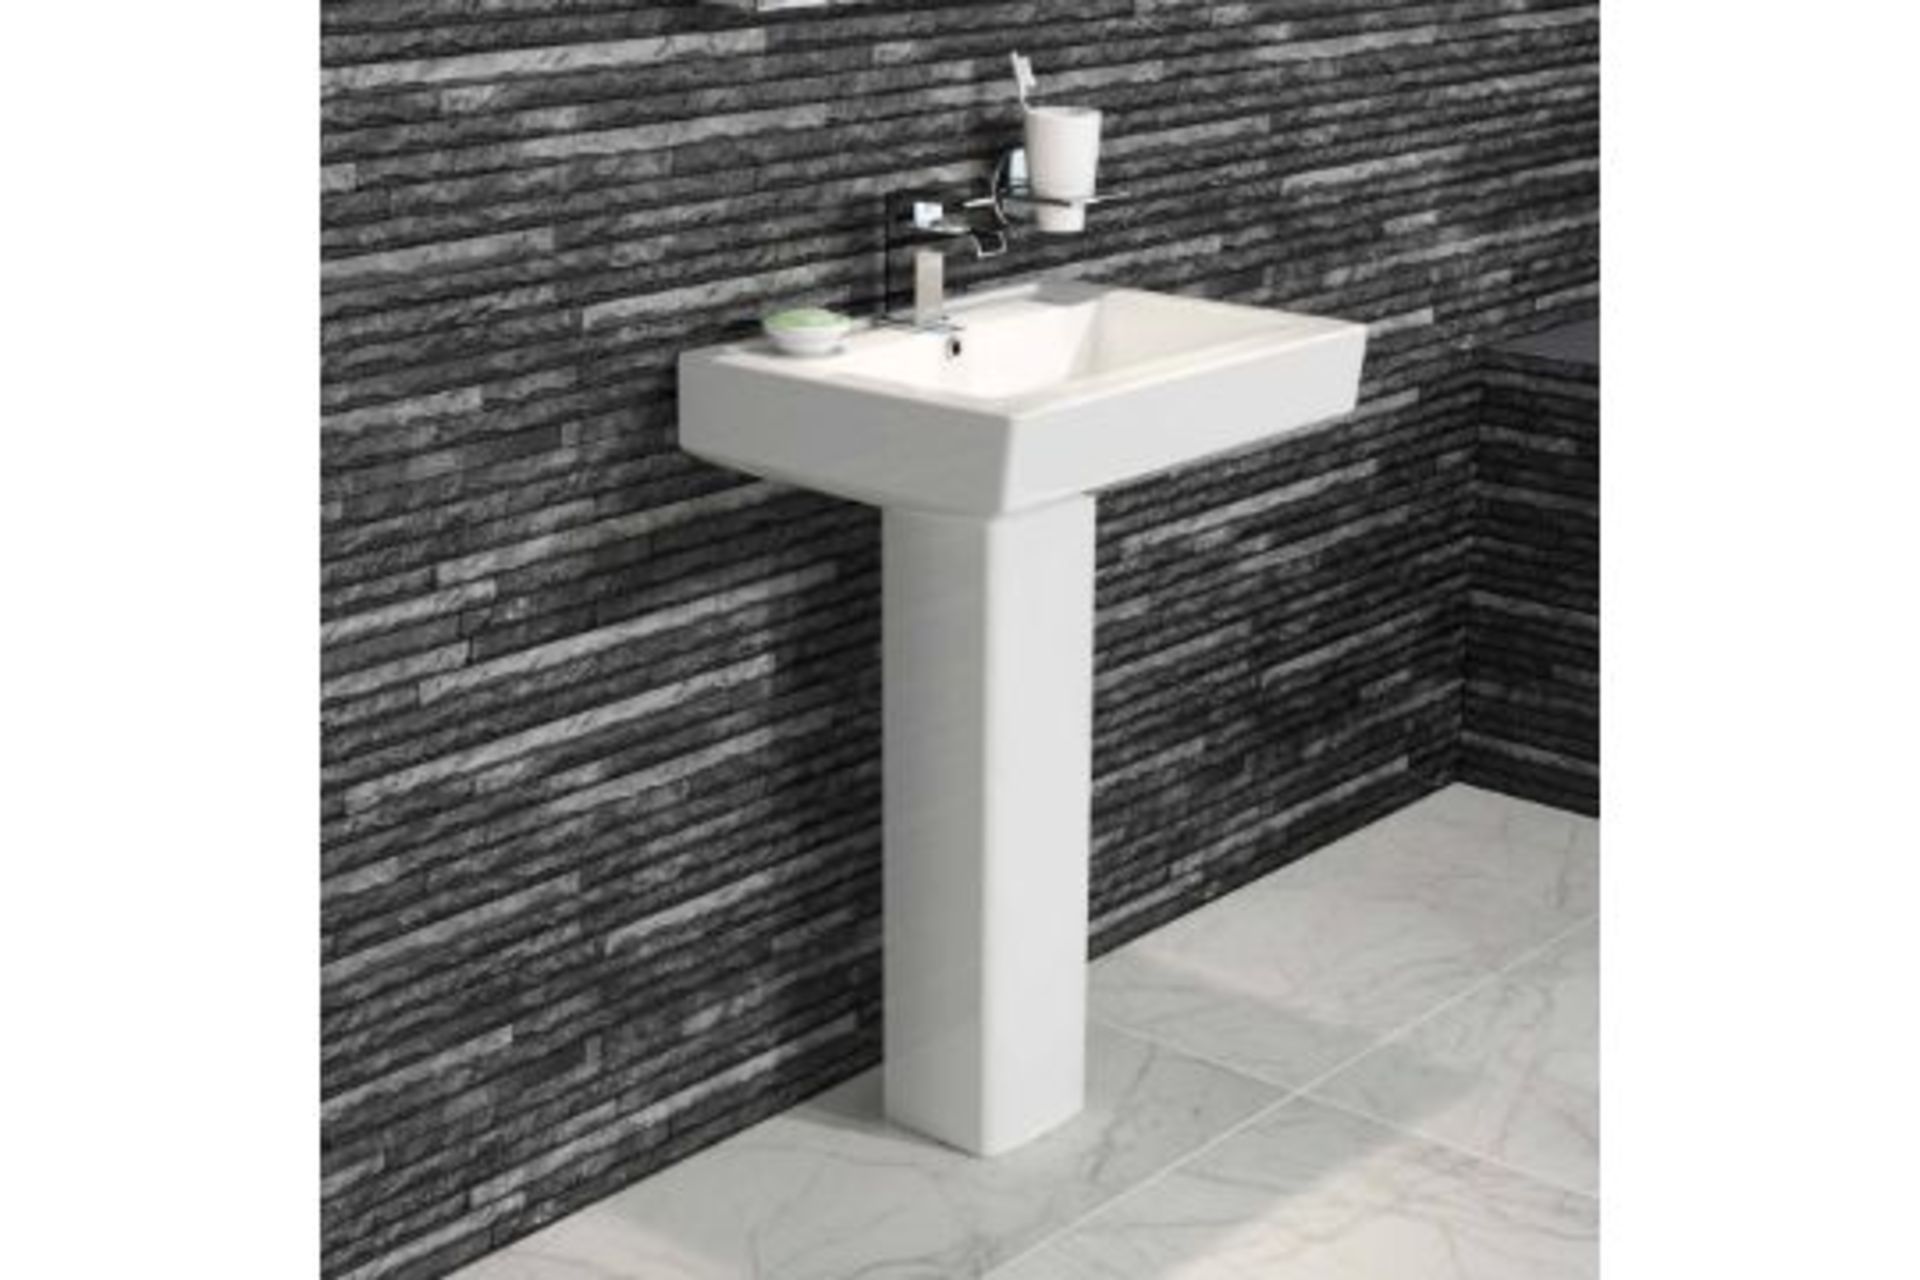 New Belfort Pedestal Basin Set RRP £379.99 Manufactured From High Quality White Vitreous China